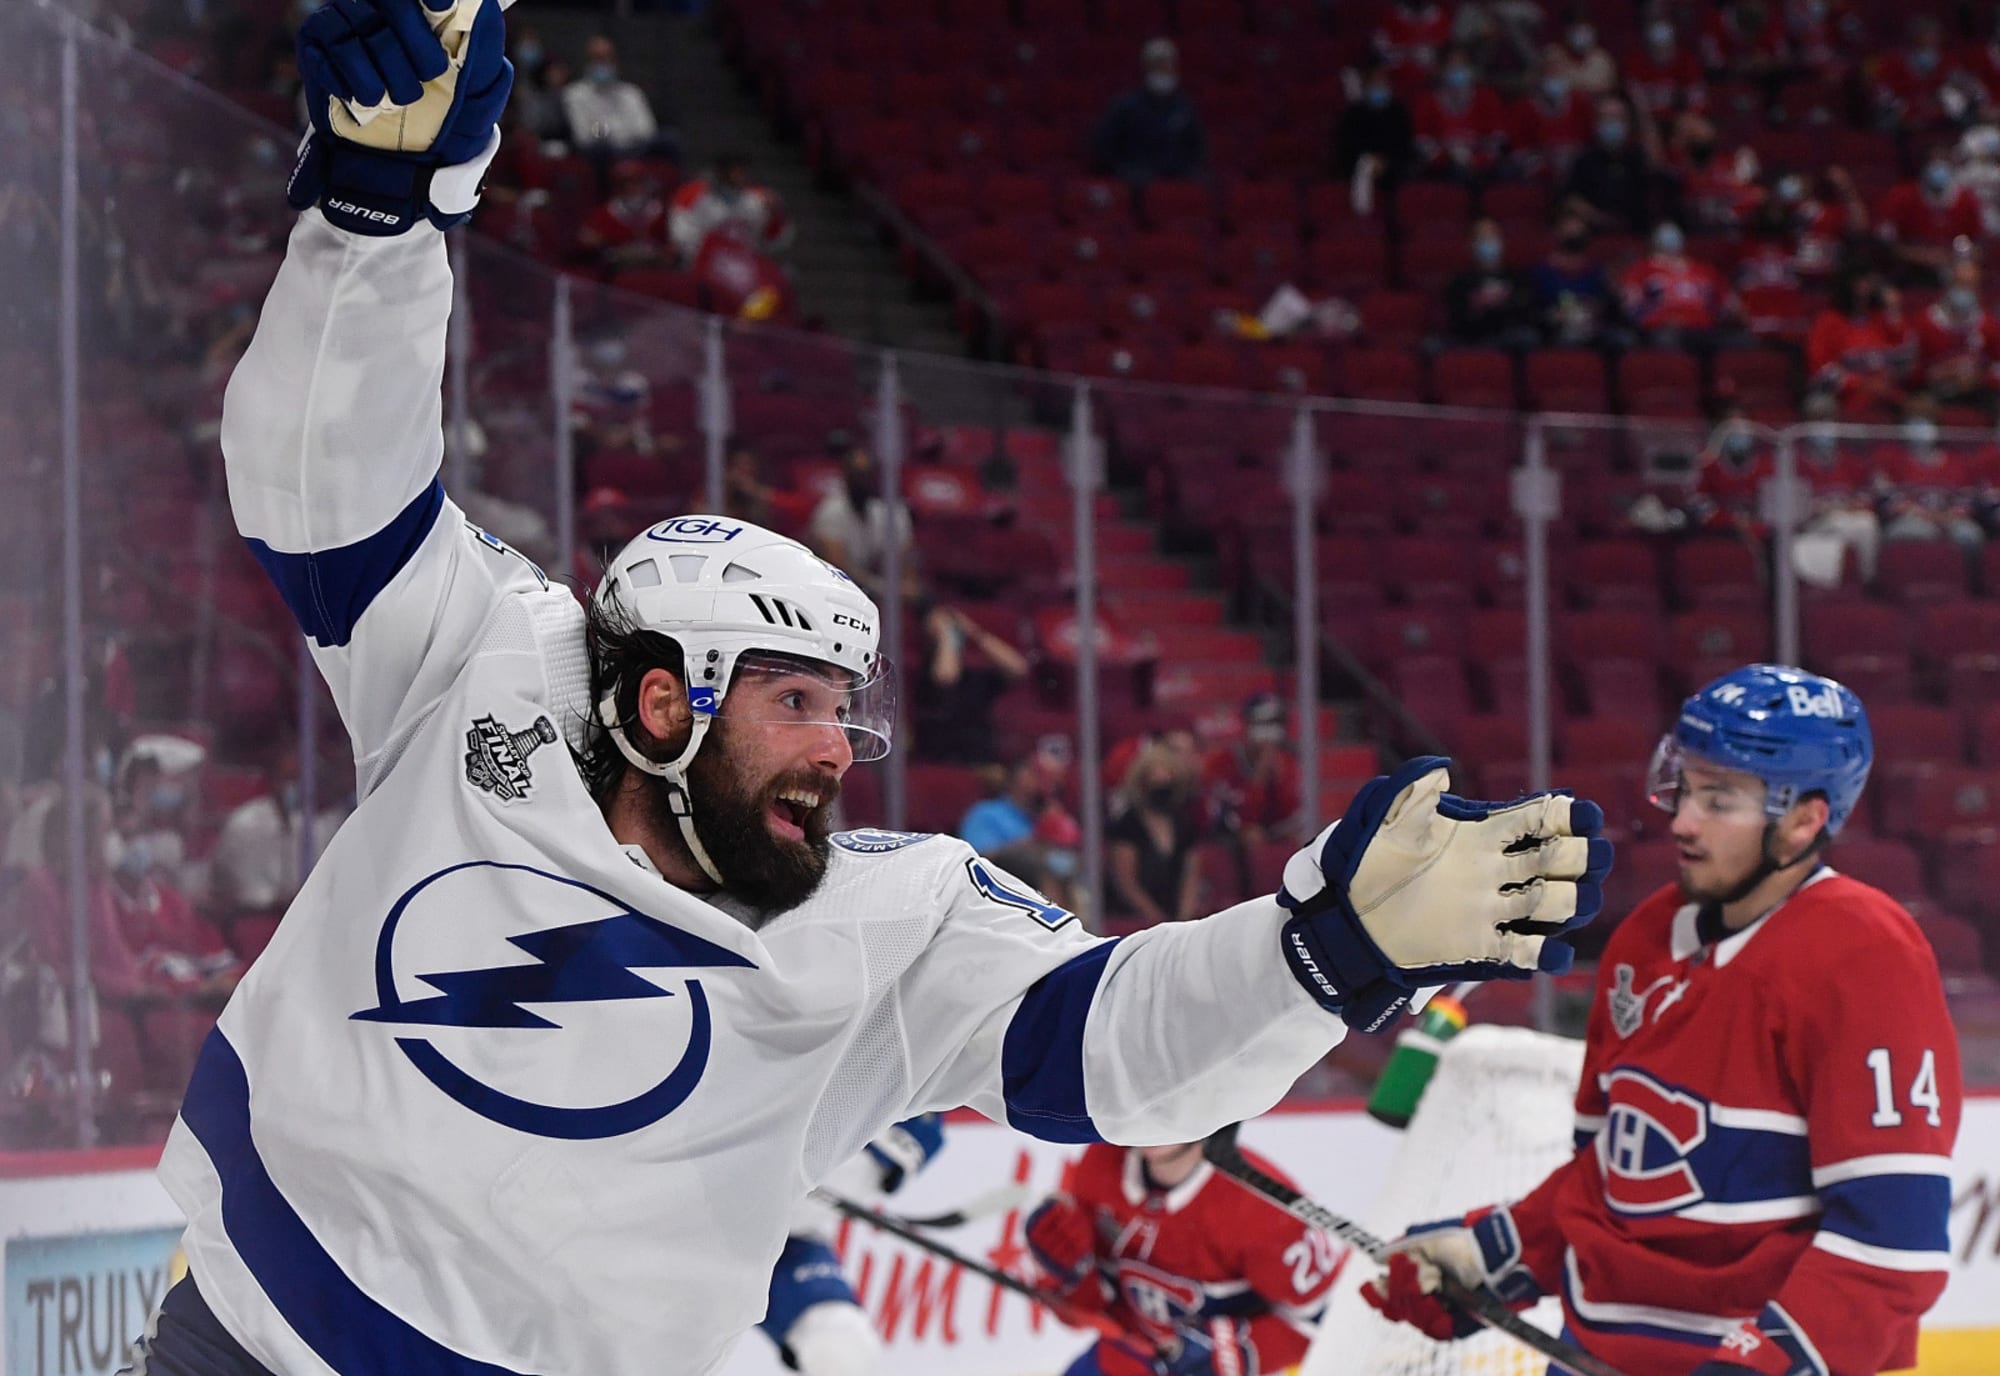 Pat Maroon is coming home to the Blues